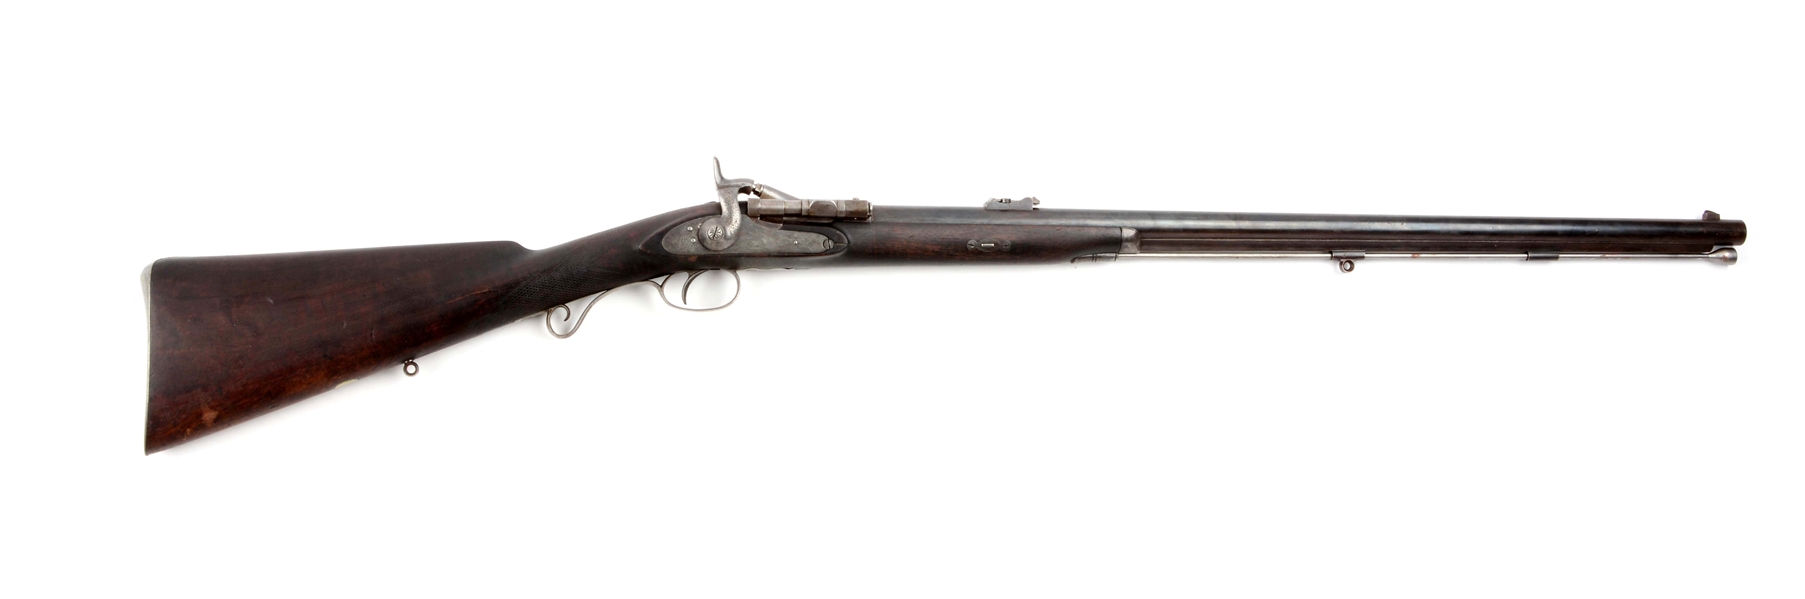 (A) SNIDERS COMMERCIAL SPORTING RIFLE BY I. HOLLIS & SONS.